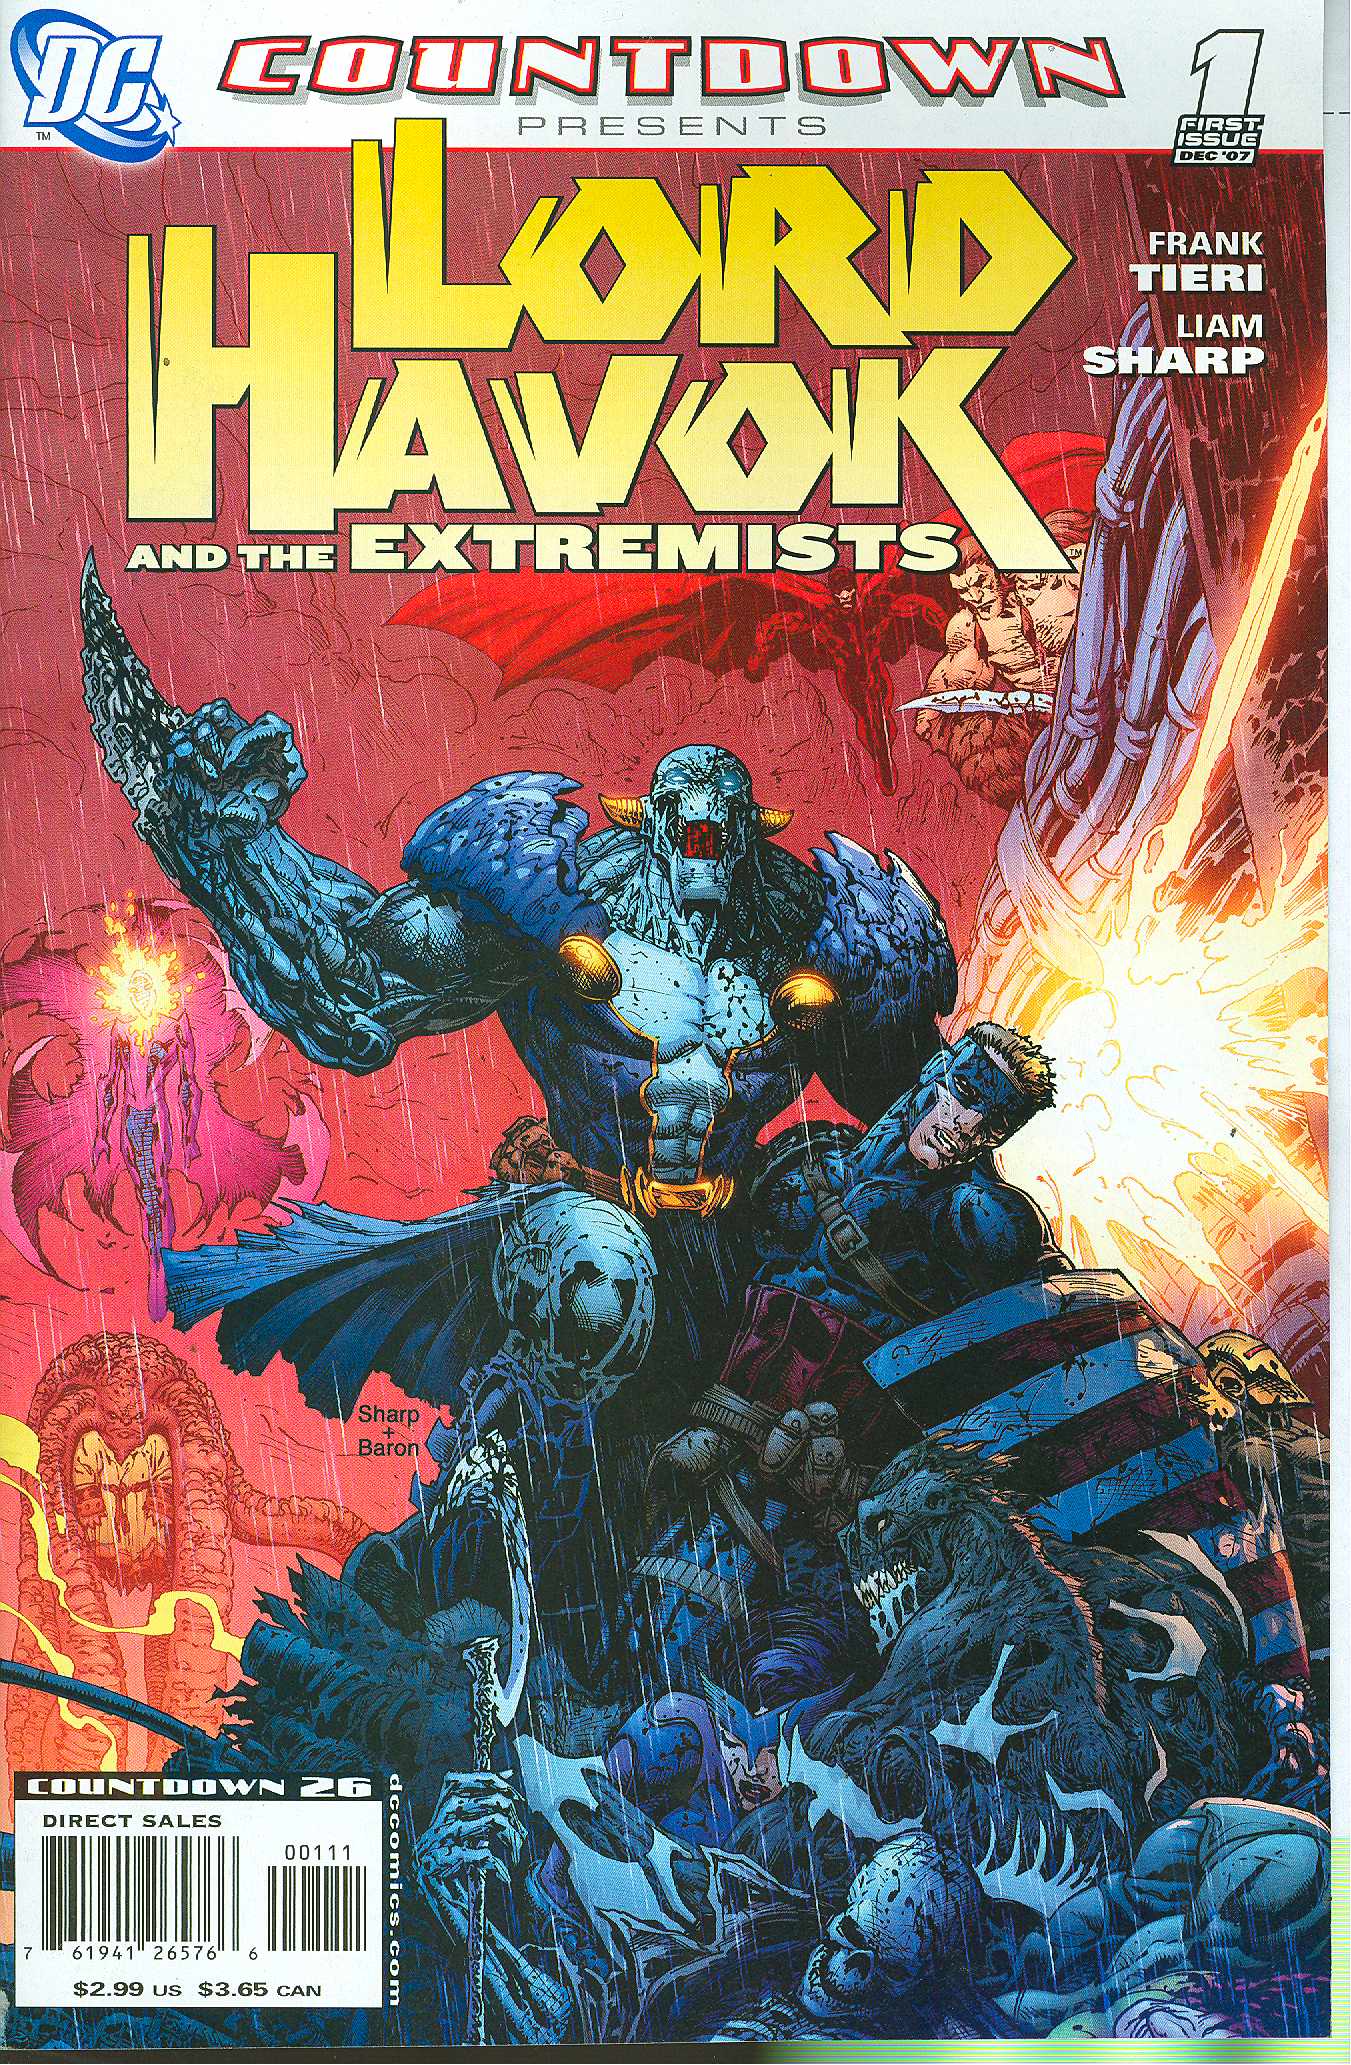 Countdown Lord Havok and the Extremists #1